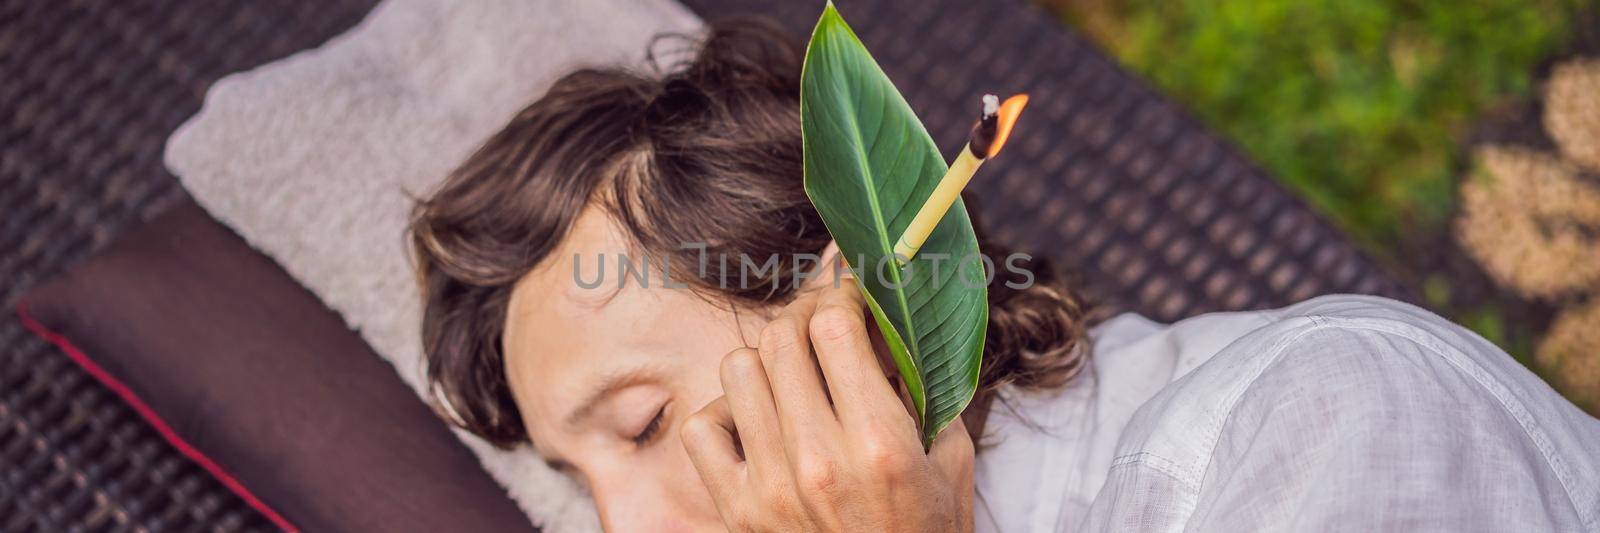 man having an ear candle therapy against the backdrop of a tropical garden. BANNER, LONG FORMAT